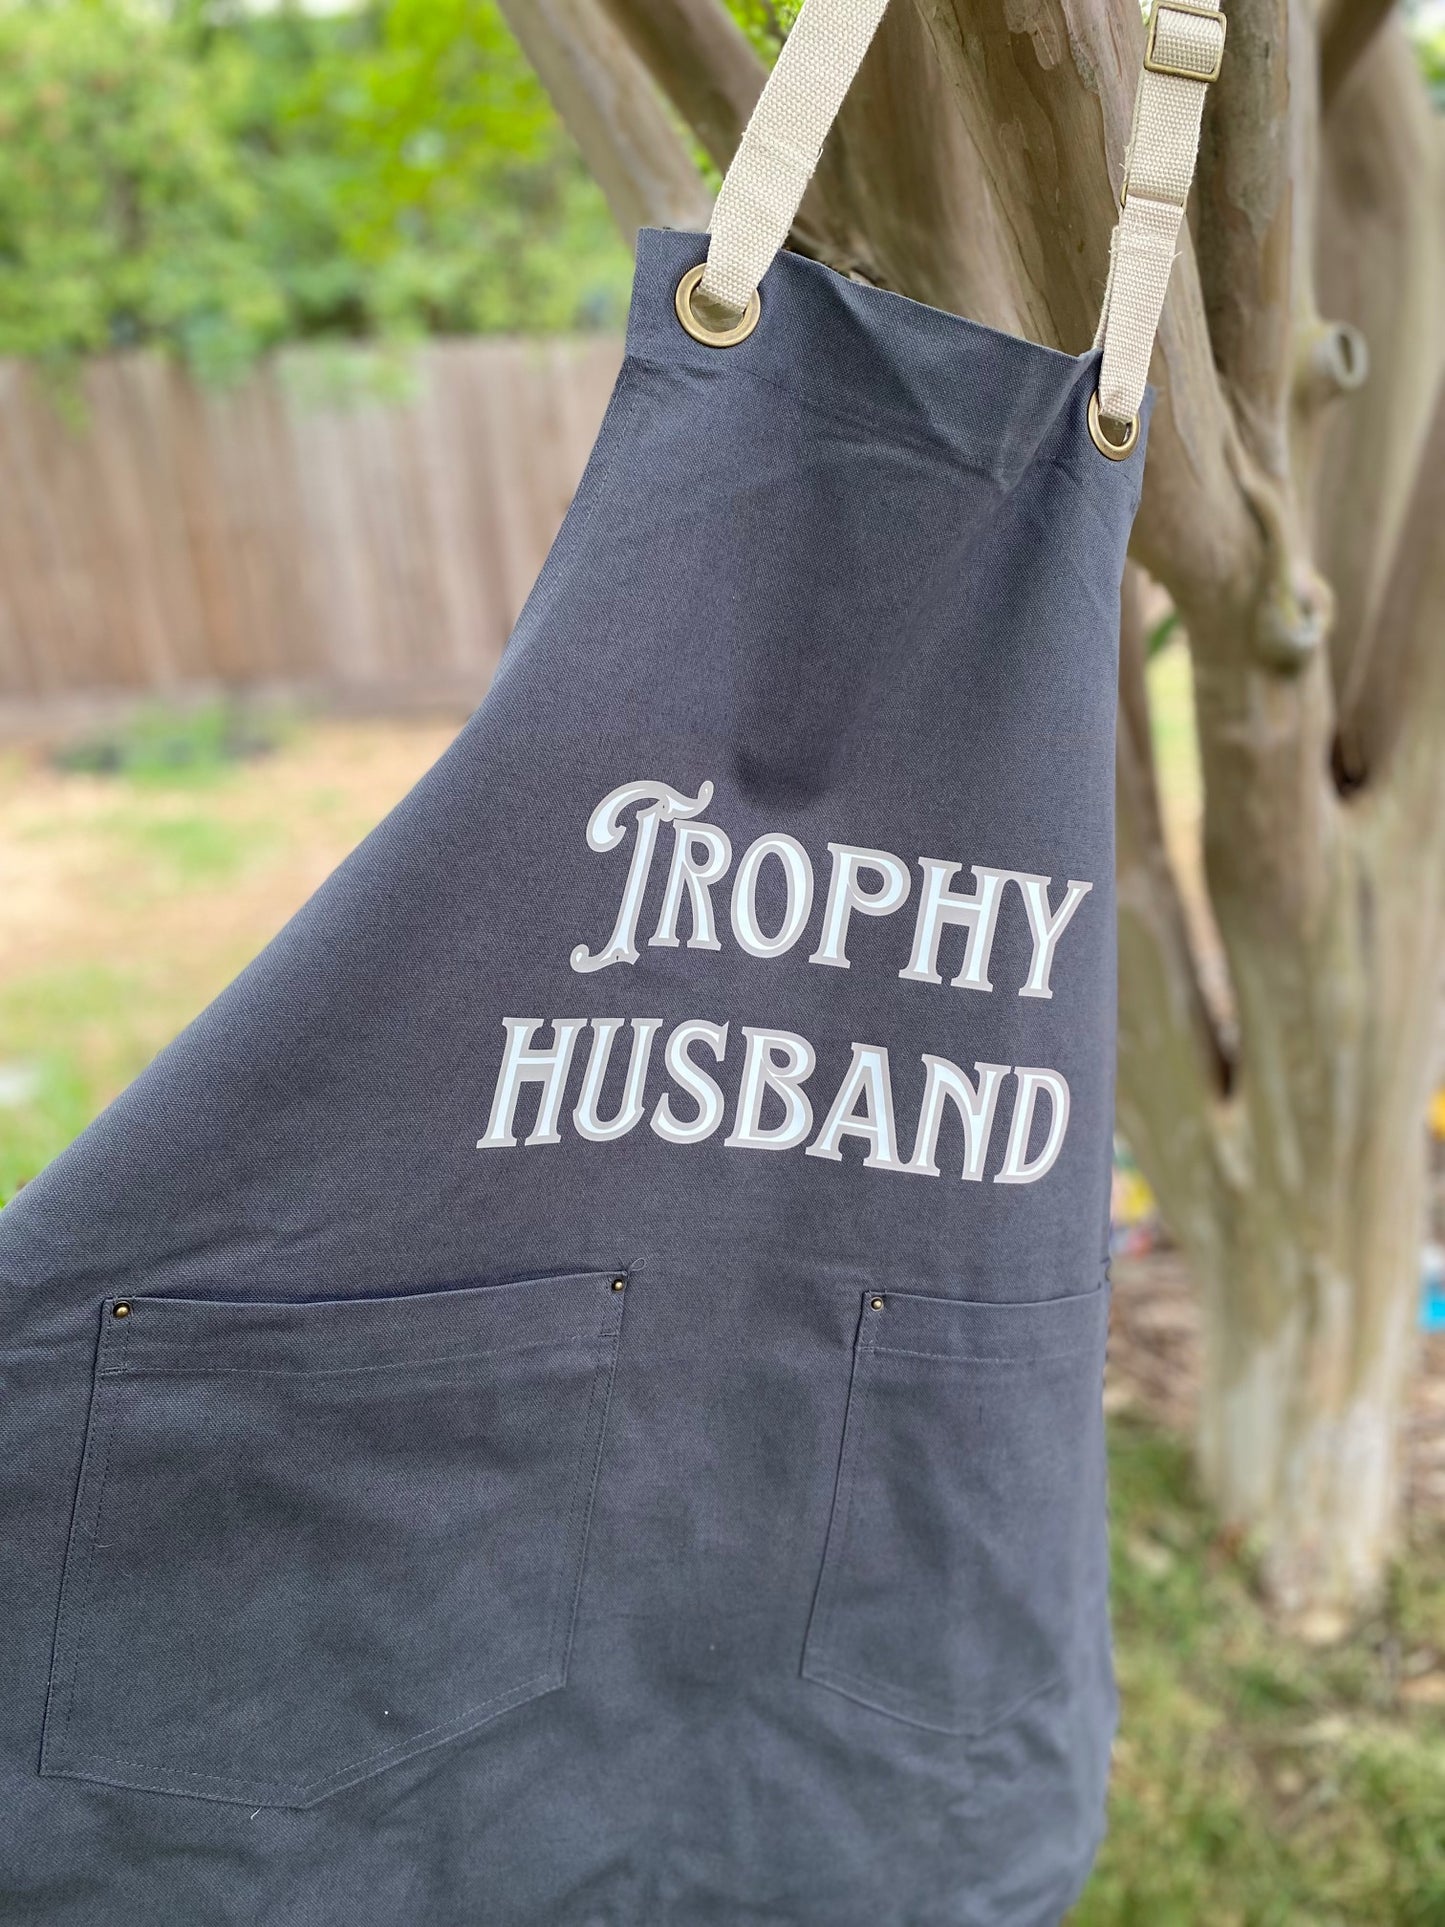 Trophy Husband Full Length Magnet and Stone Apron